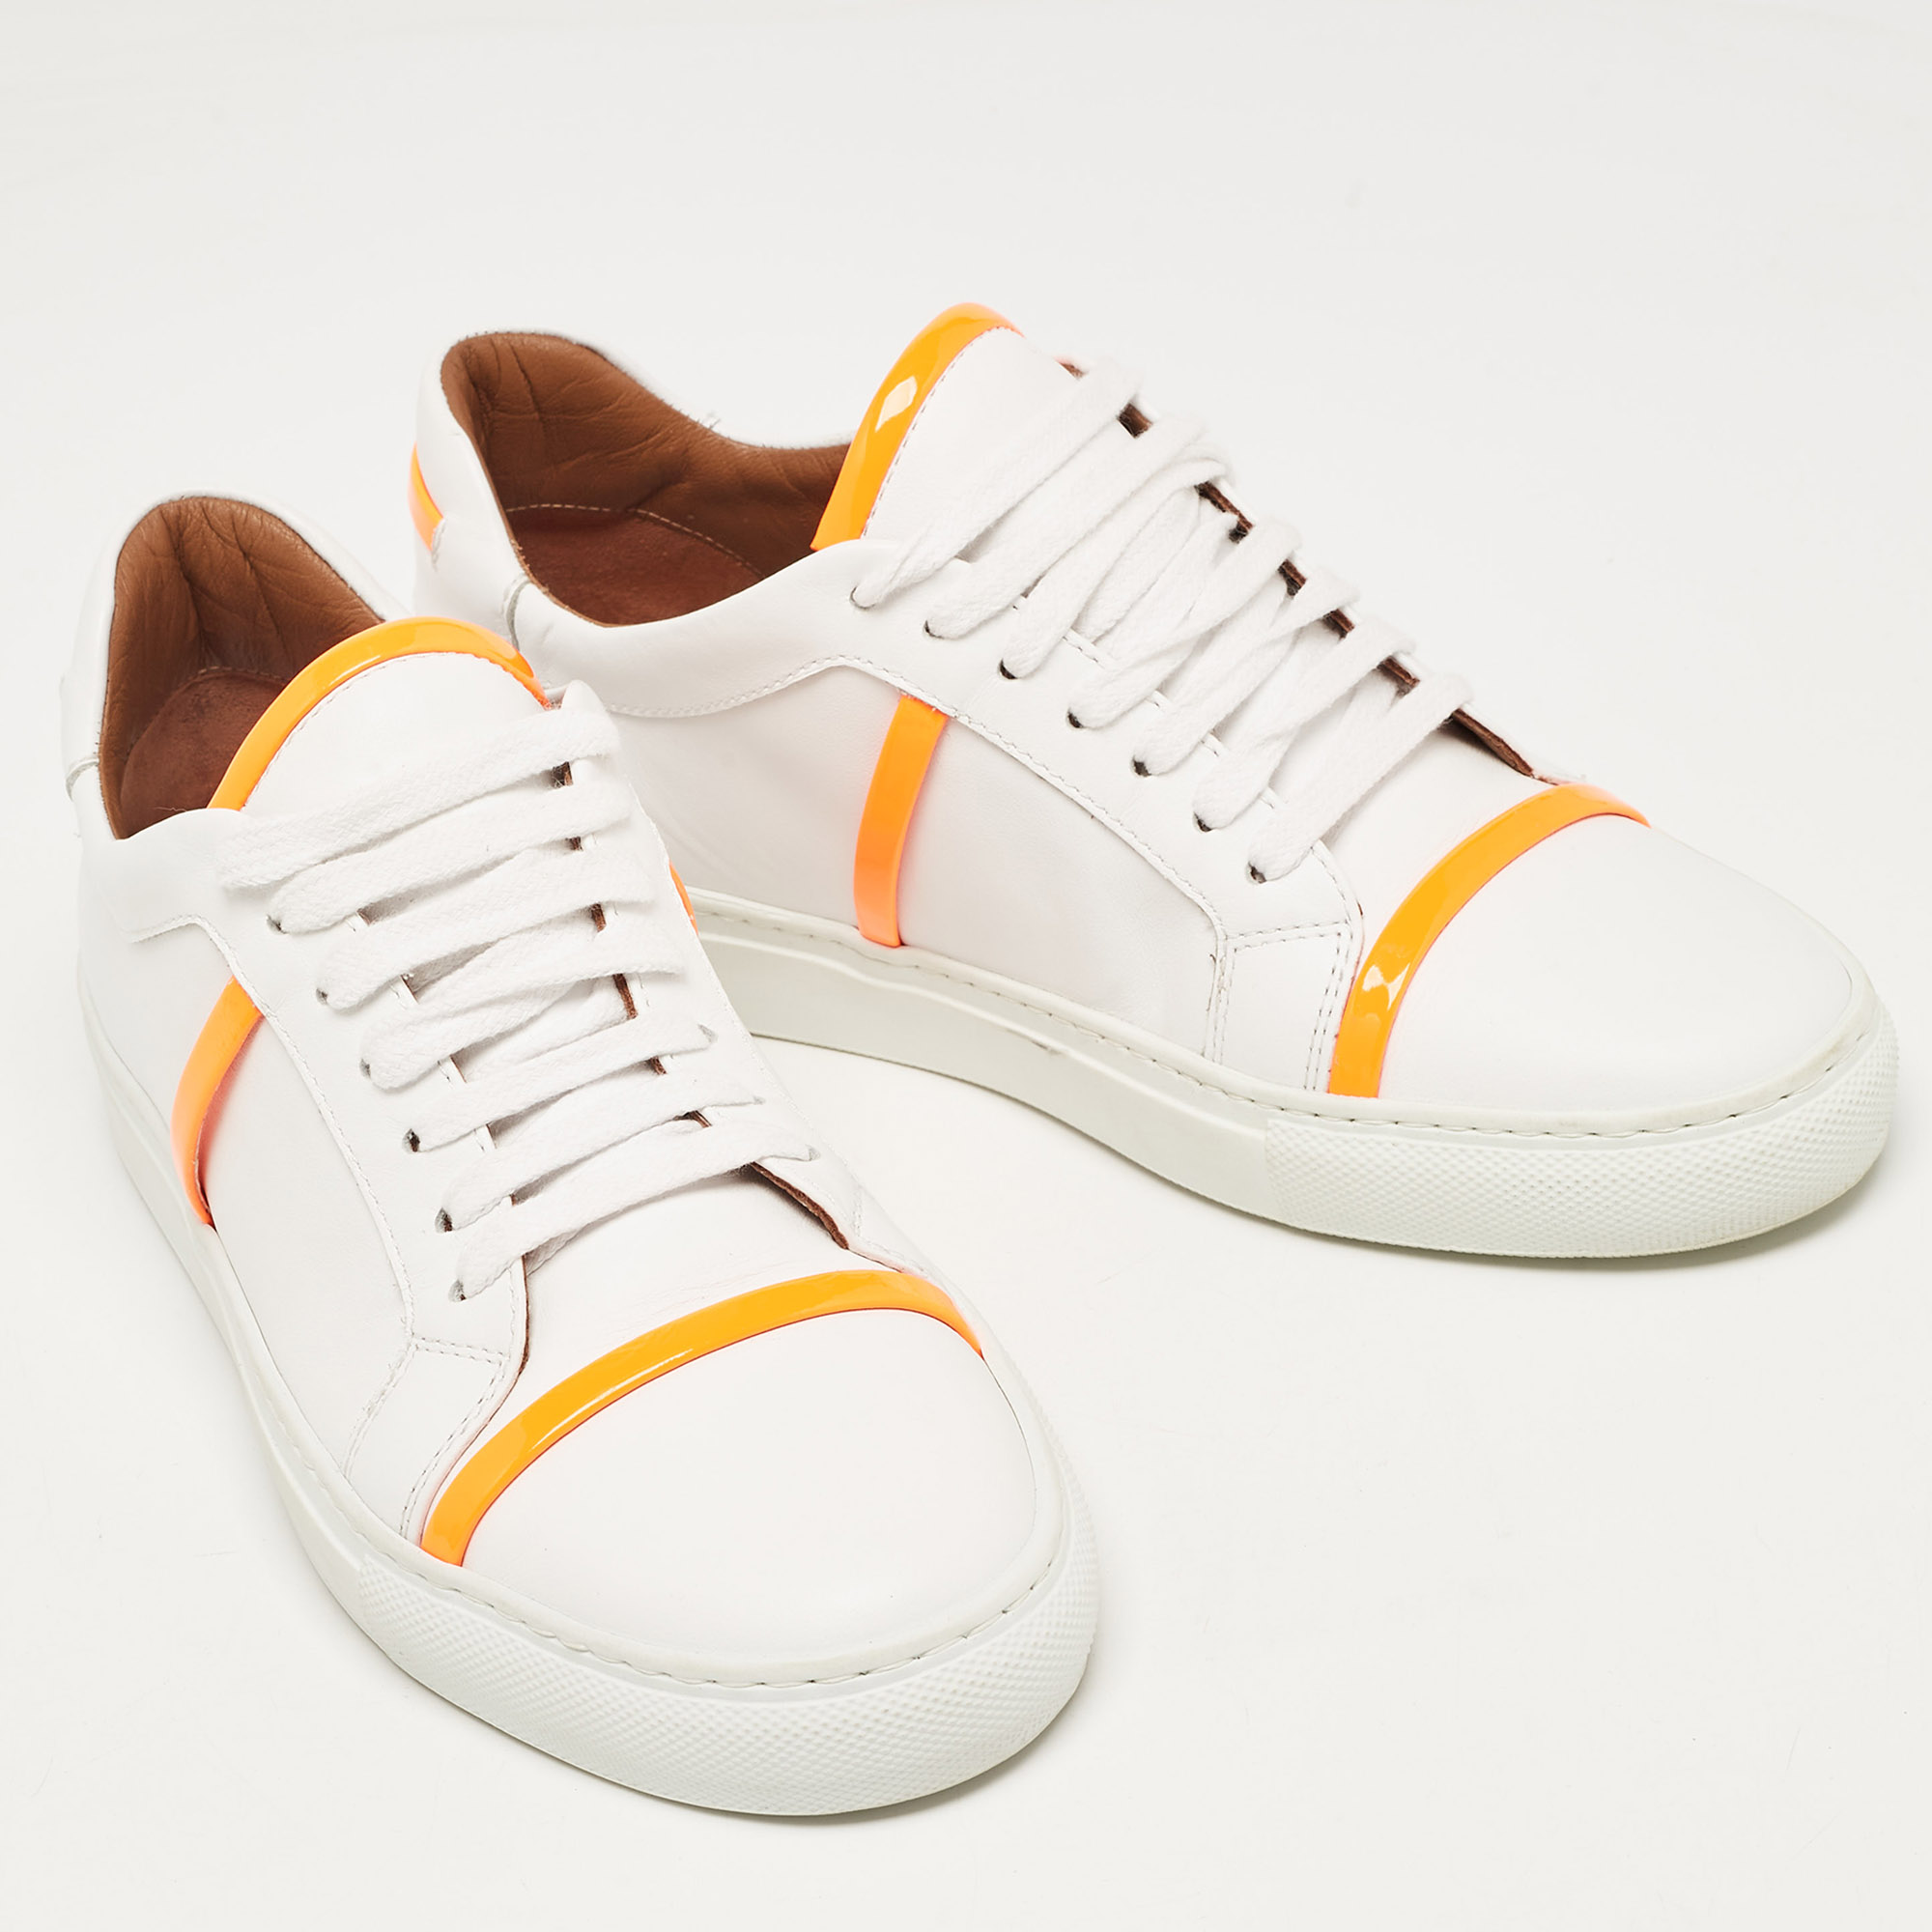 Malone Souliers White/Neon Orange Leather And Patent Deon Sneakers Size 37